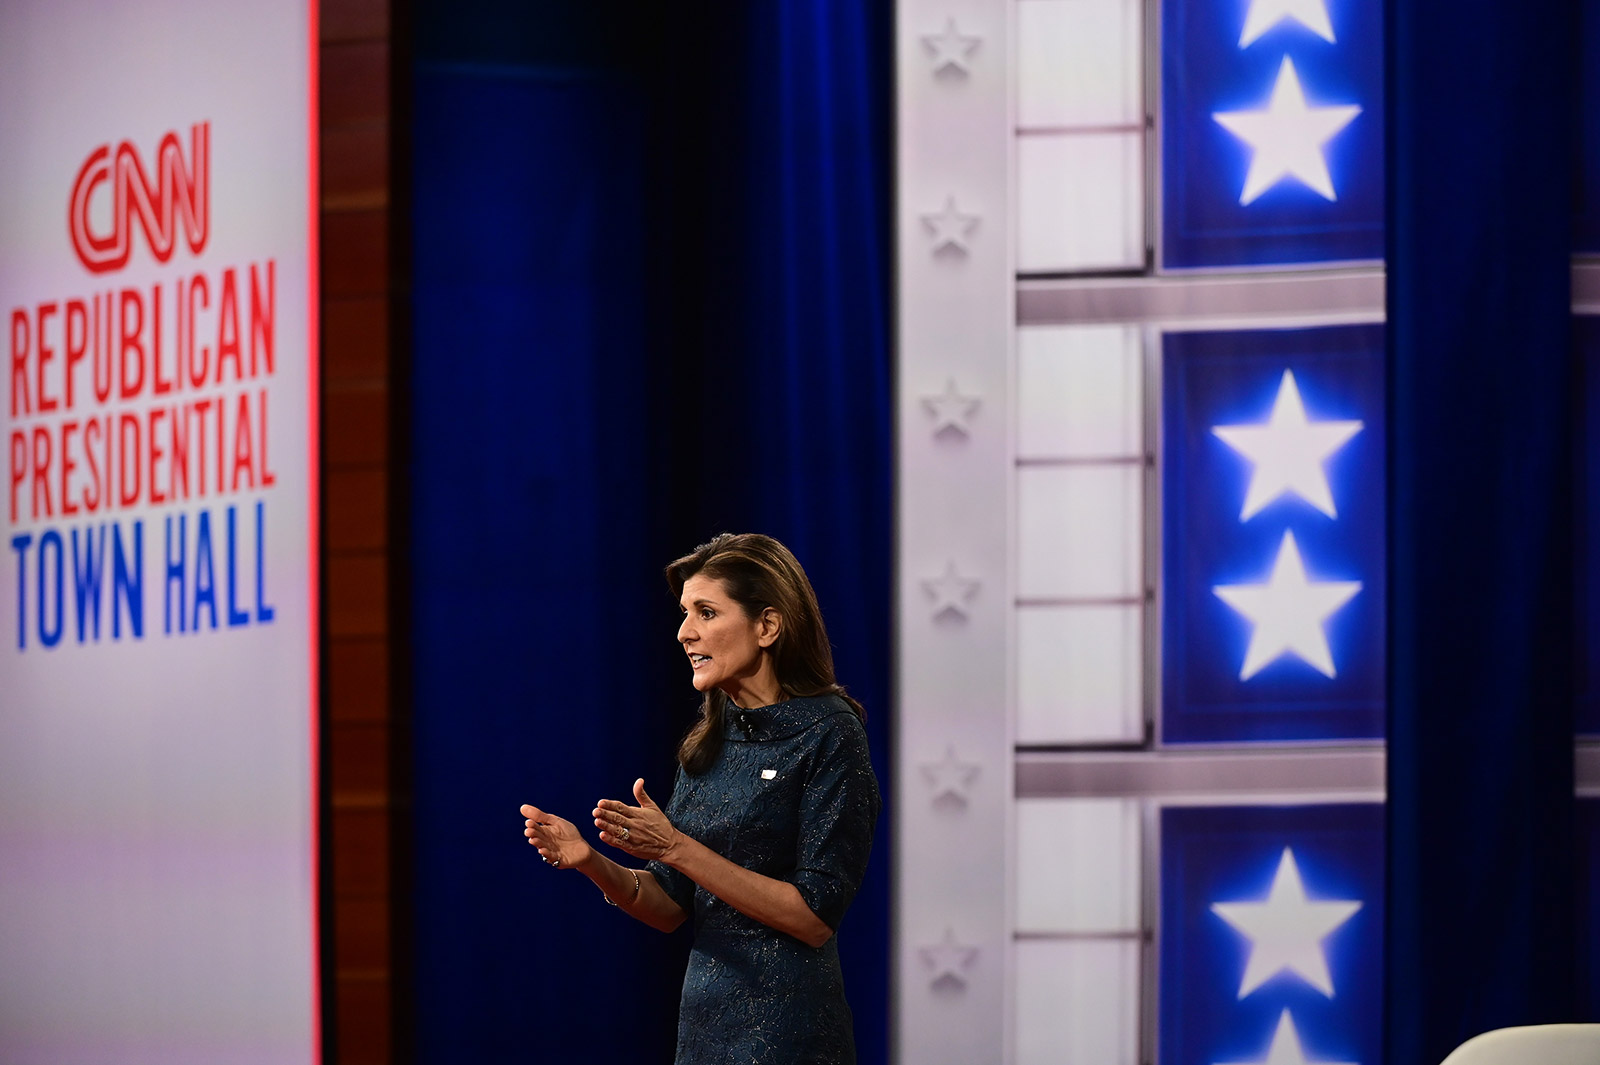 The event took place at a pivotal moment for Haley after coming in third in the Iowa caucuses.